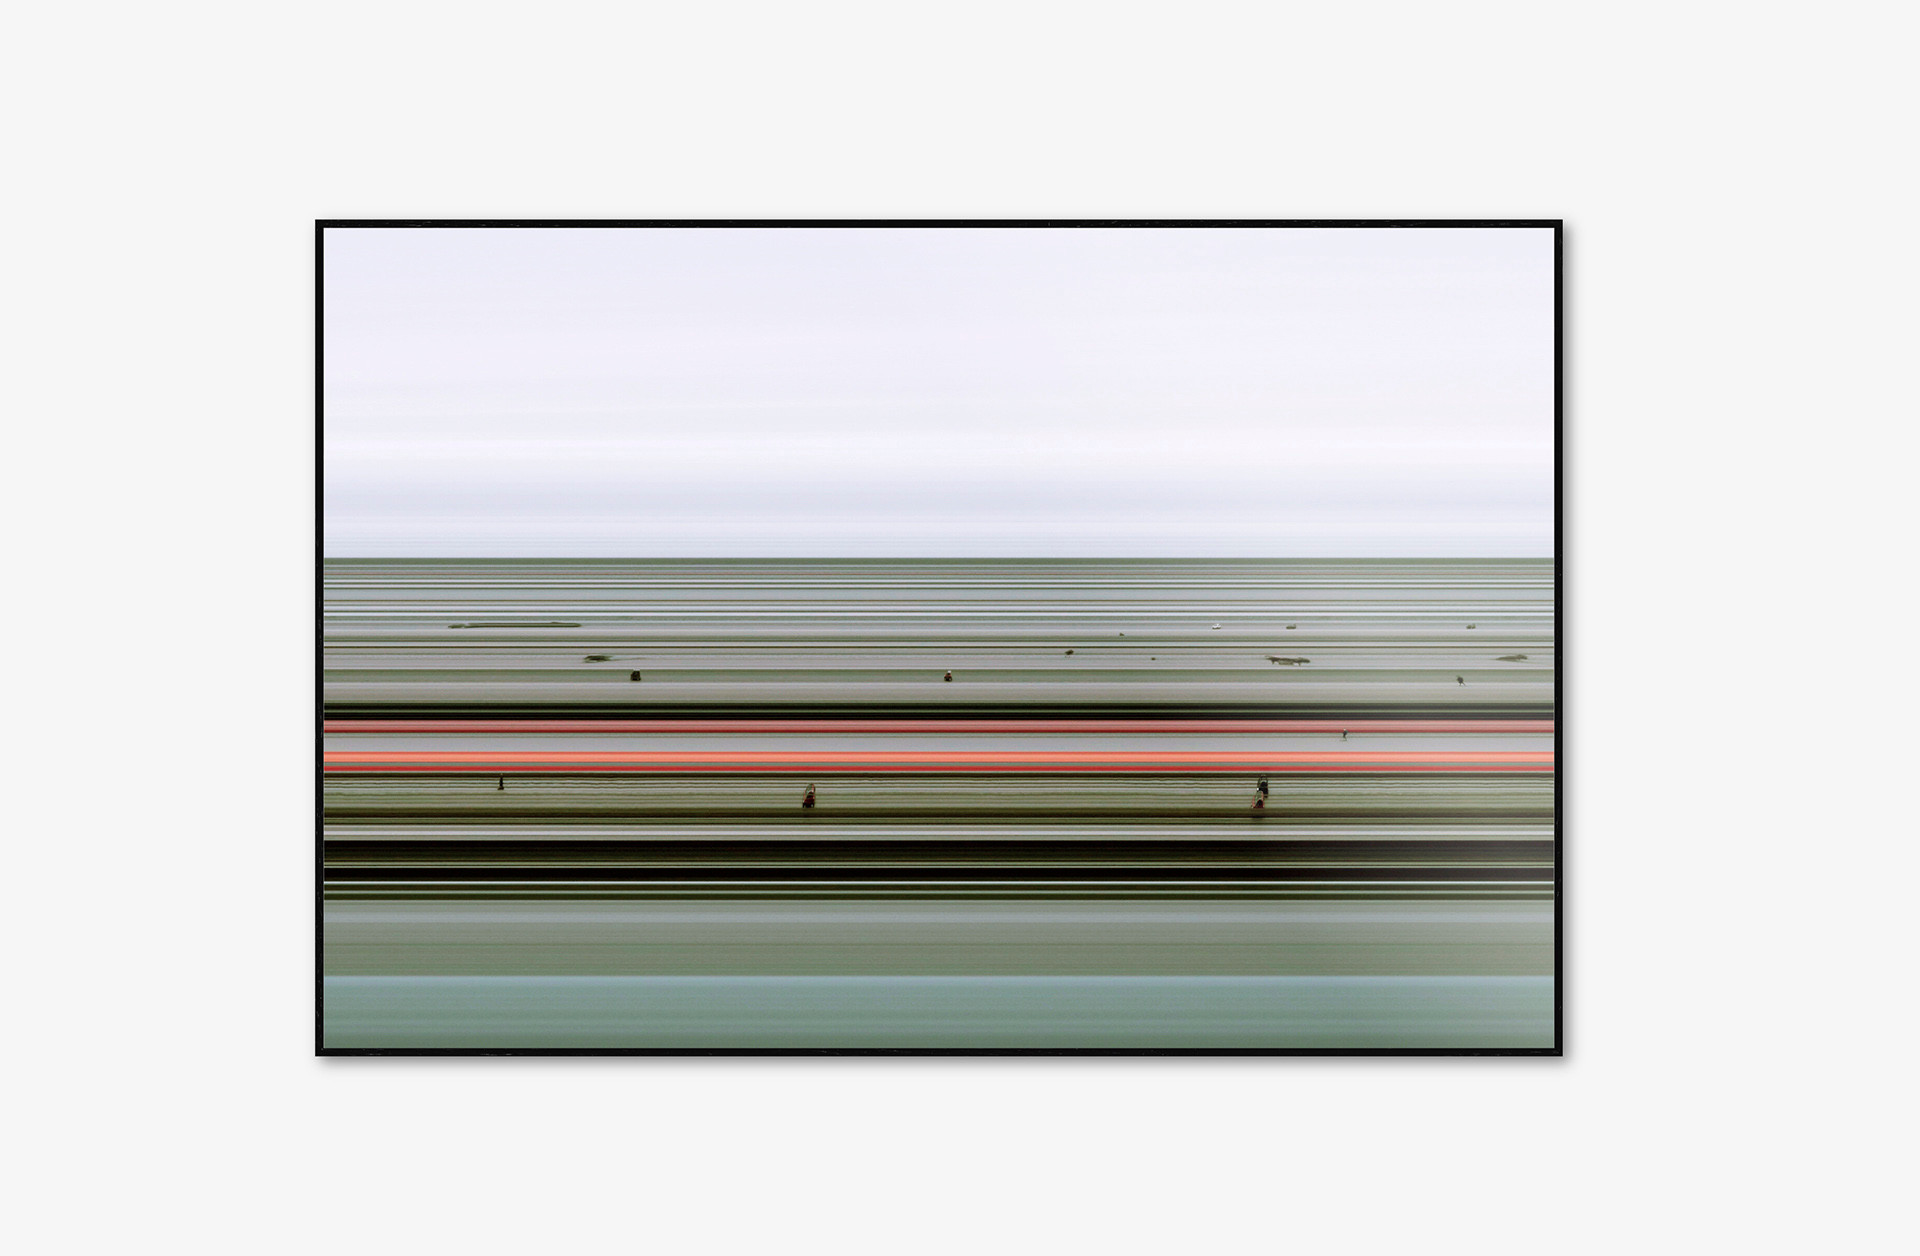 TimeScape No.1 (2019). Multimedia Installation:
Two-channel HD Video (from 4k DCI master), silent, Loop, Dimensions variable.